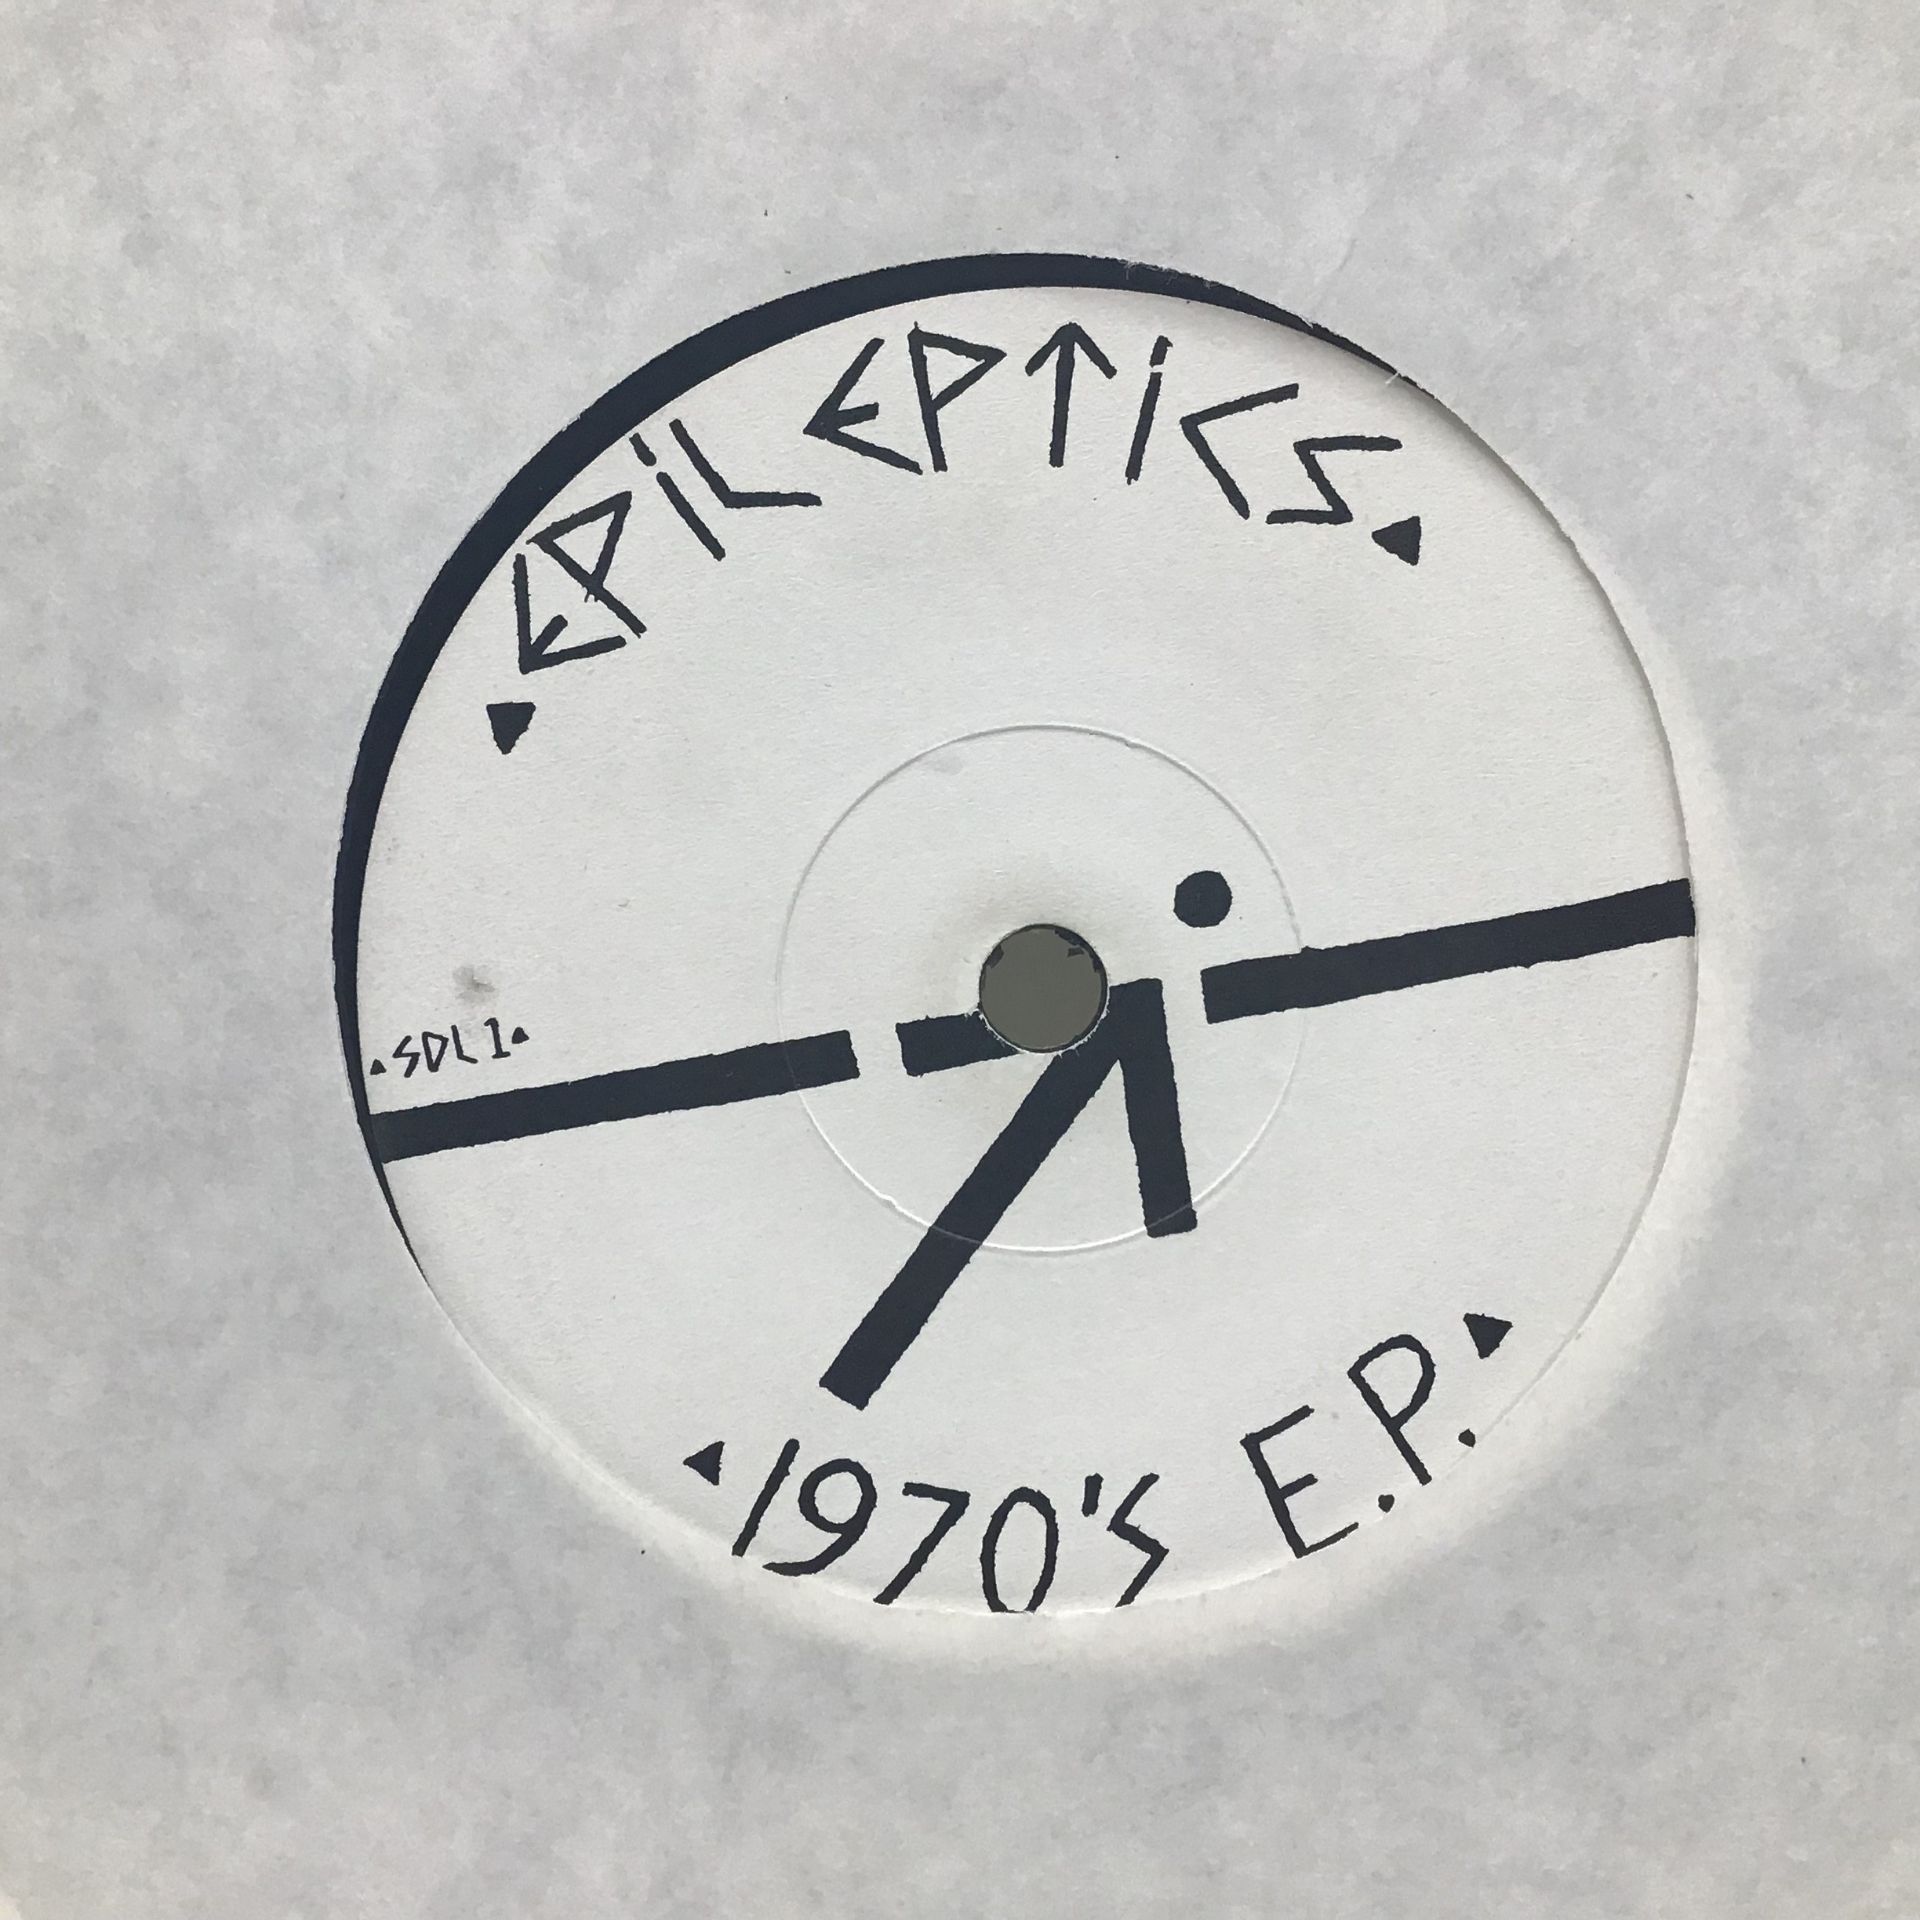 THE EPILEPTICS 1970’s EP 7" SINGLE. This rare 7” was released in 1981 on Vinyl Spider Leg Records - Image 3 of 5